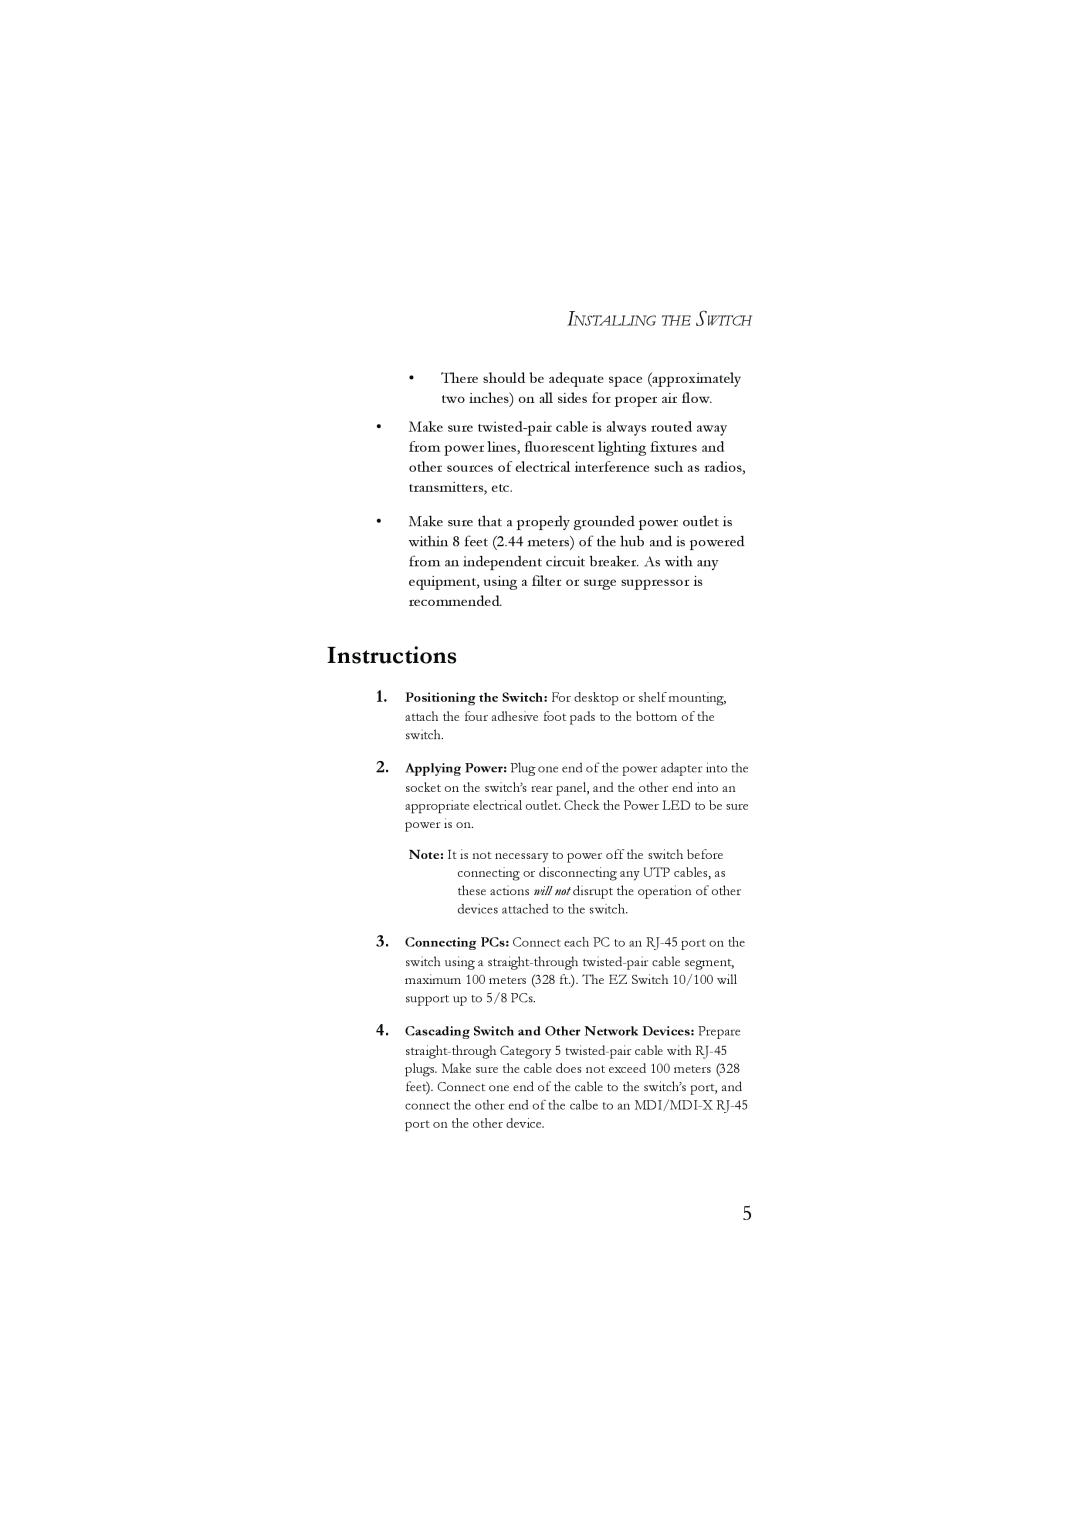 SMC Networks 10/100 manual Instructions 